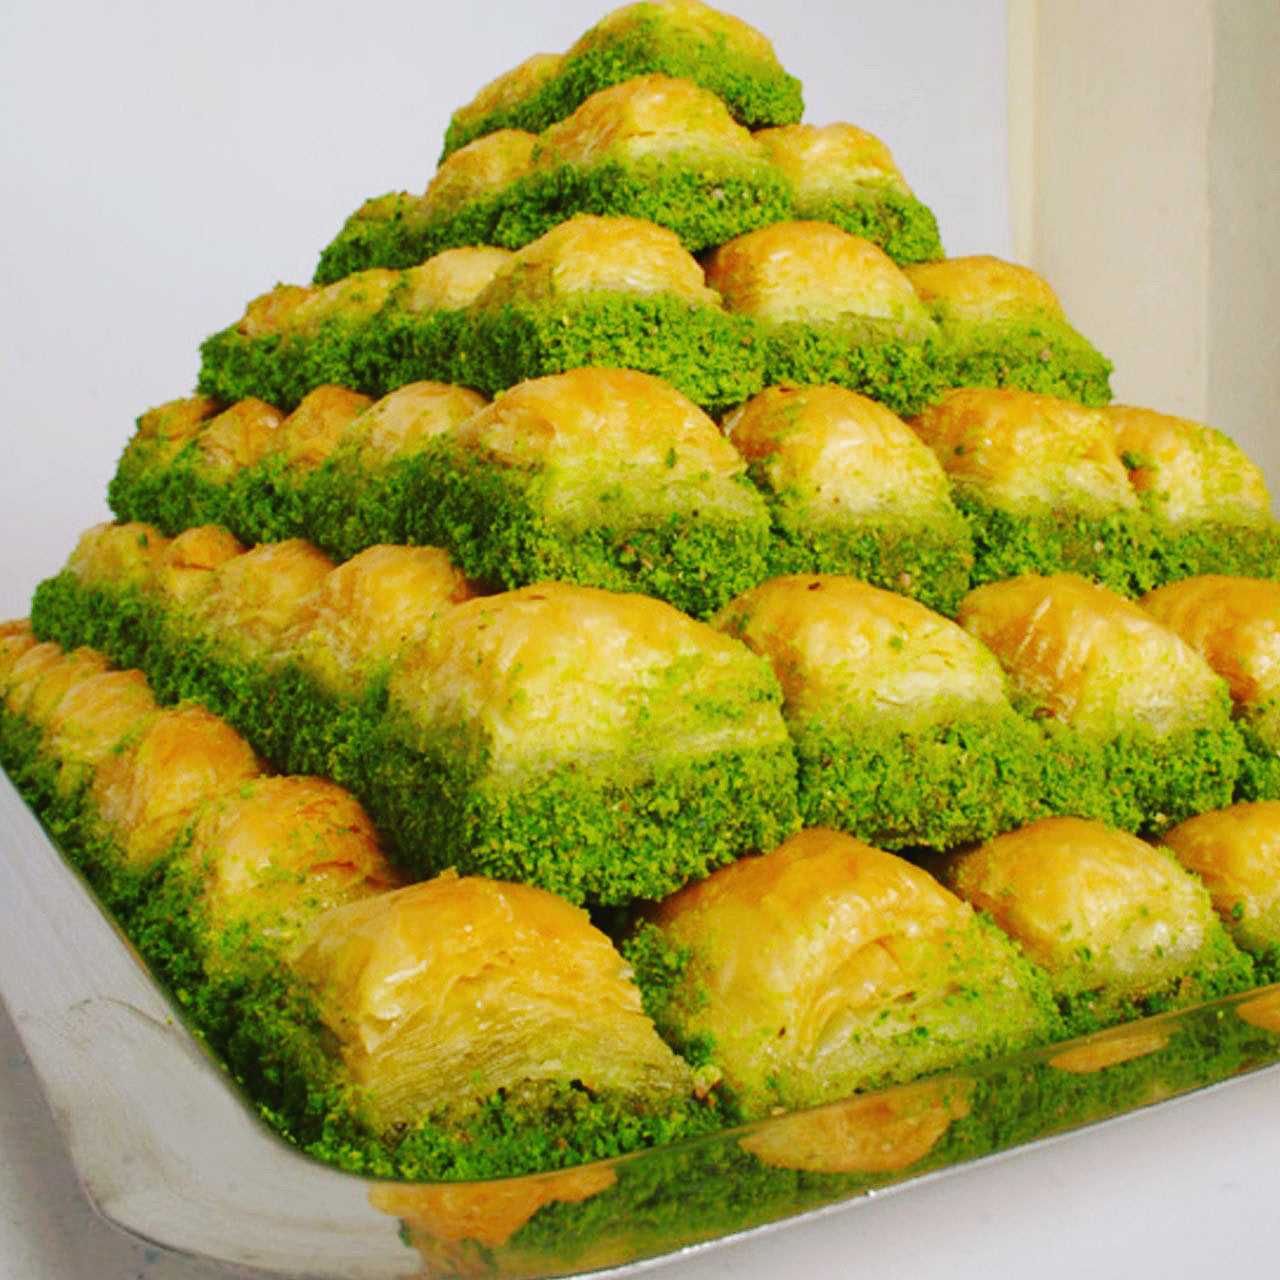 Traditional Dry Baklava with Pistachio